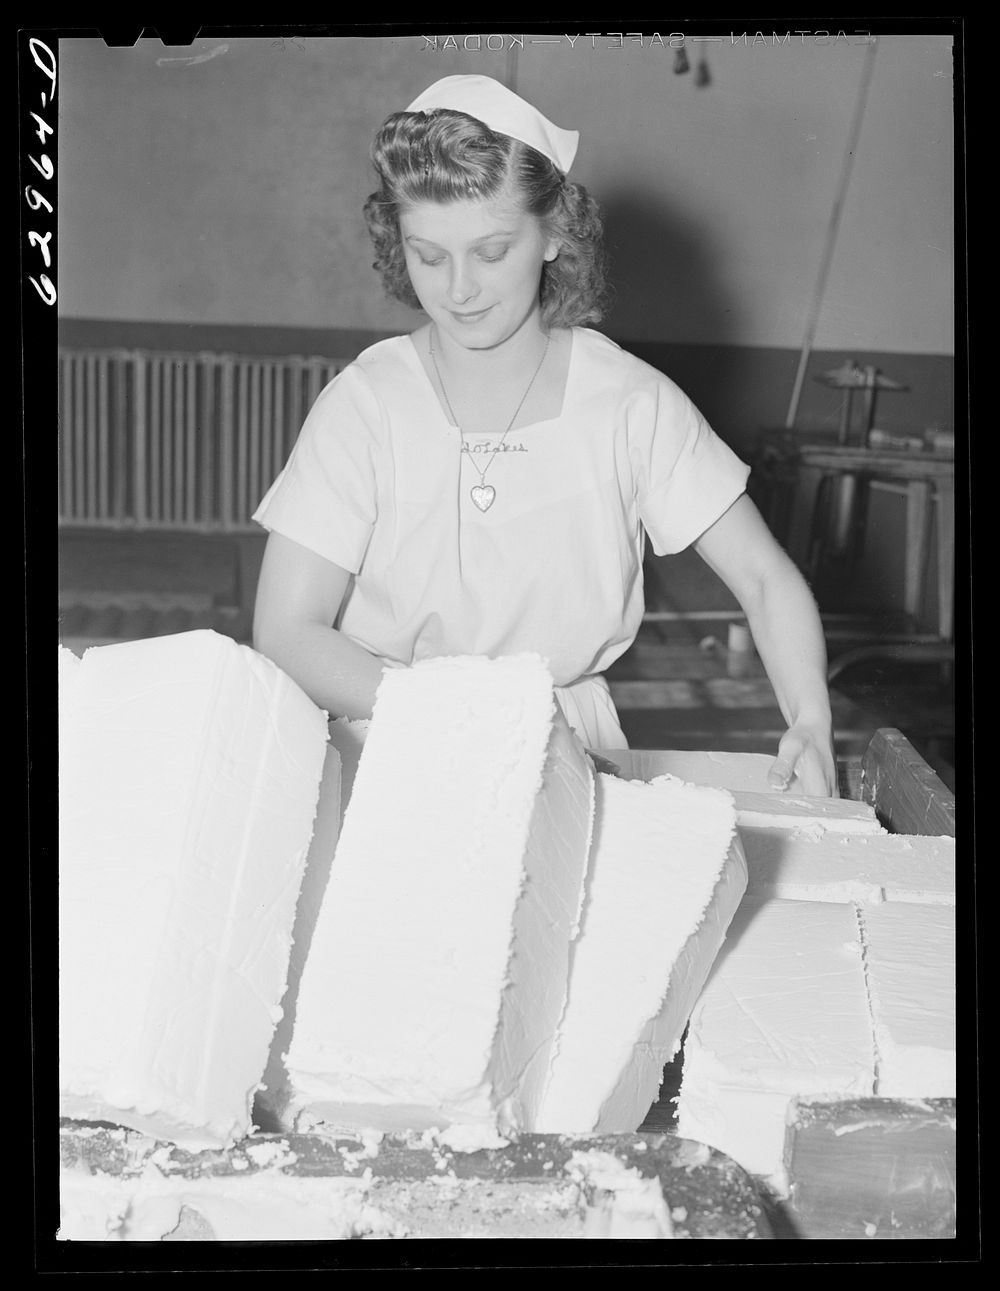 Preparing butter for cutting and packing. Land O'Lakes plant, Chicago, Illinois. Sourced from the Library of Congress.